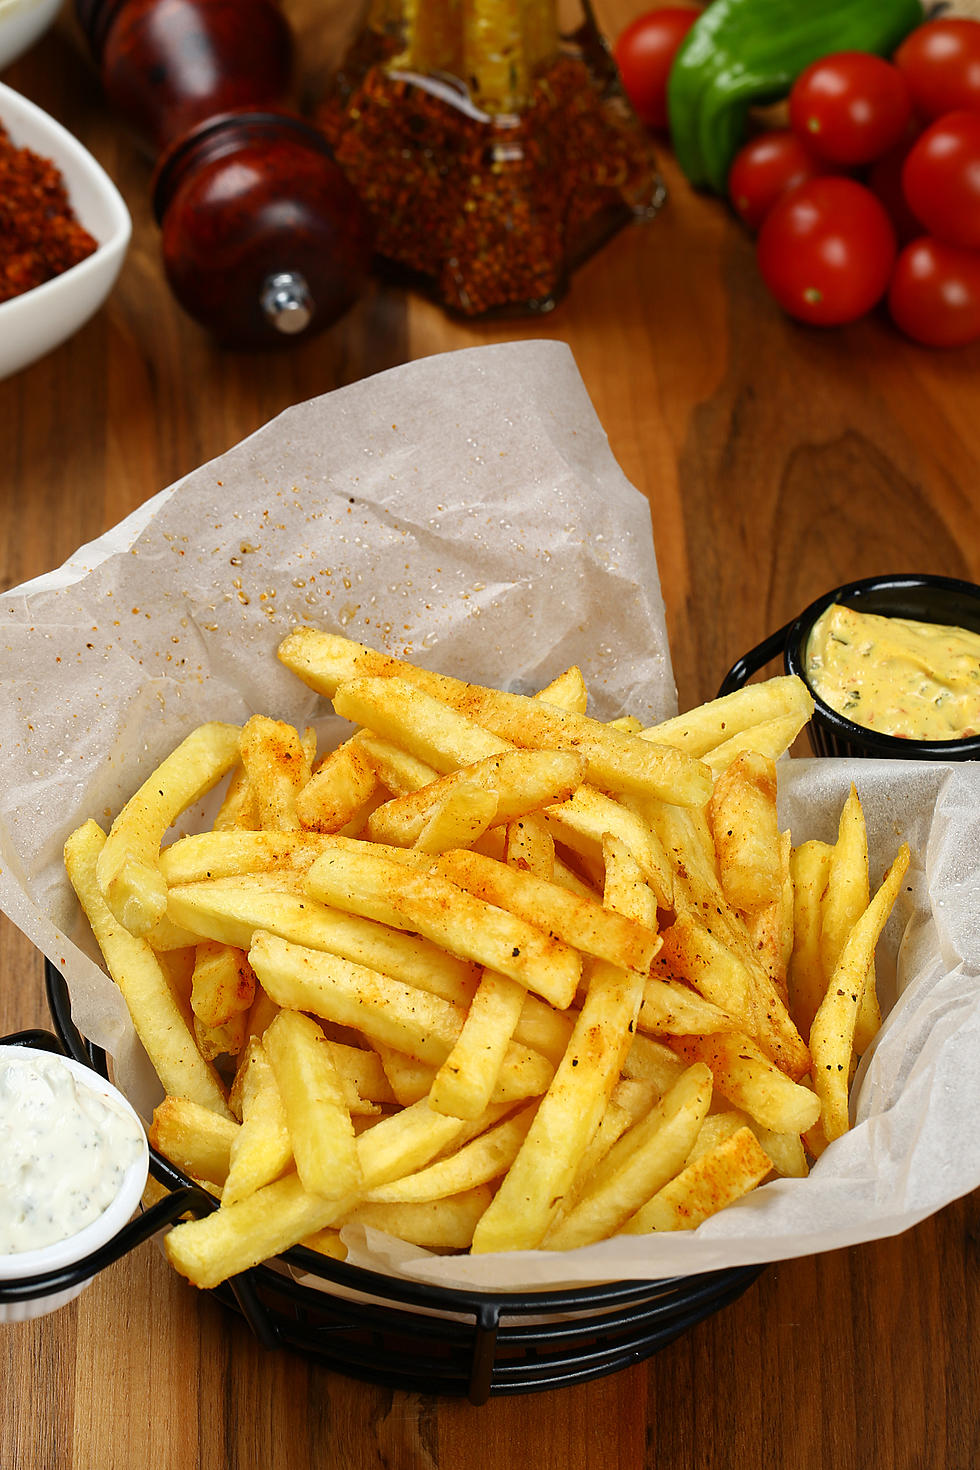 This Massachusetts Eatery Named Best French Fries in the U.S.